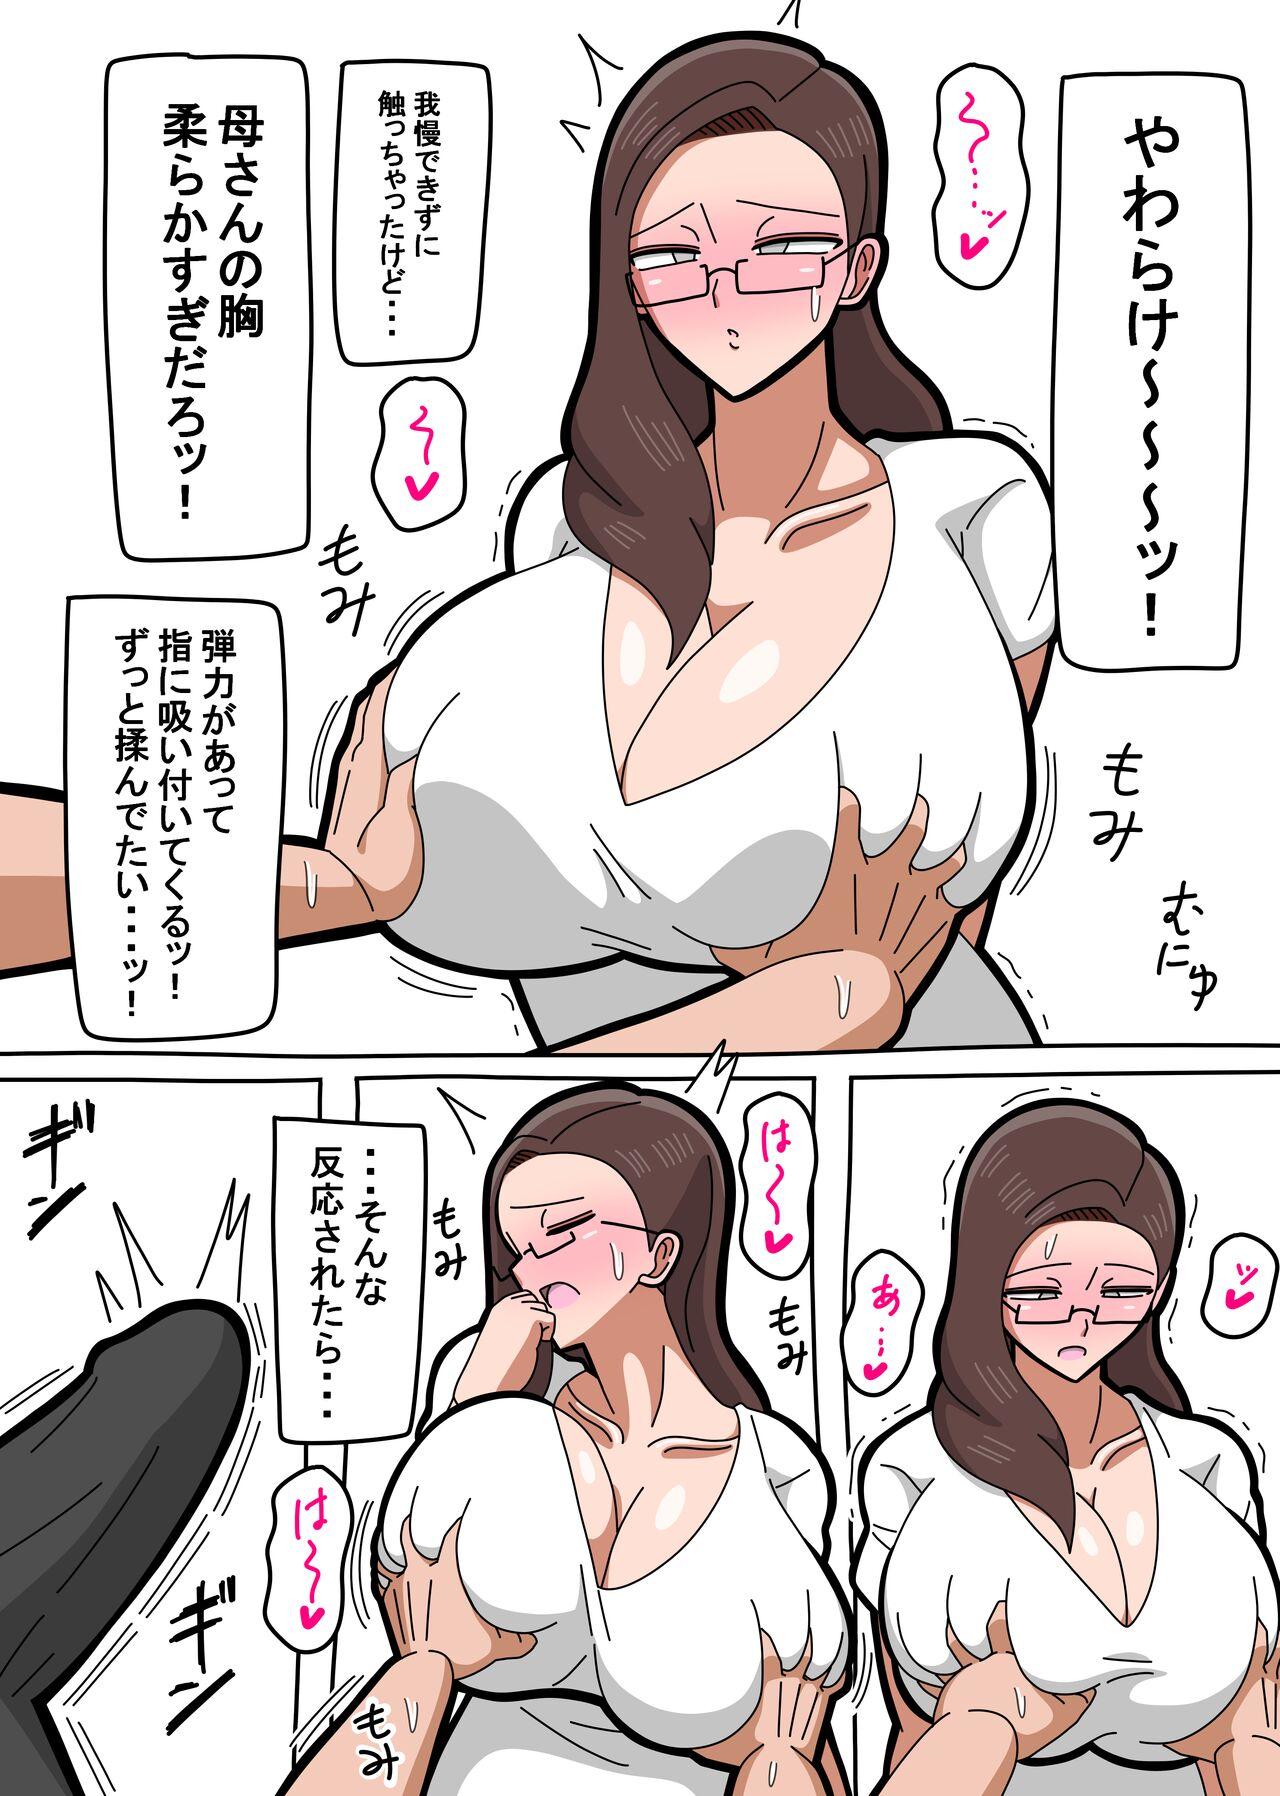 Foot 母さんは女社長 - Original Young - Page 8